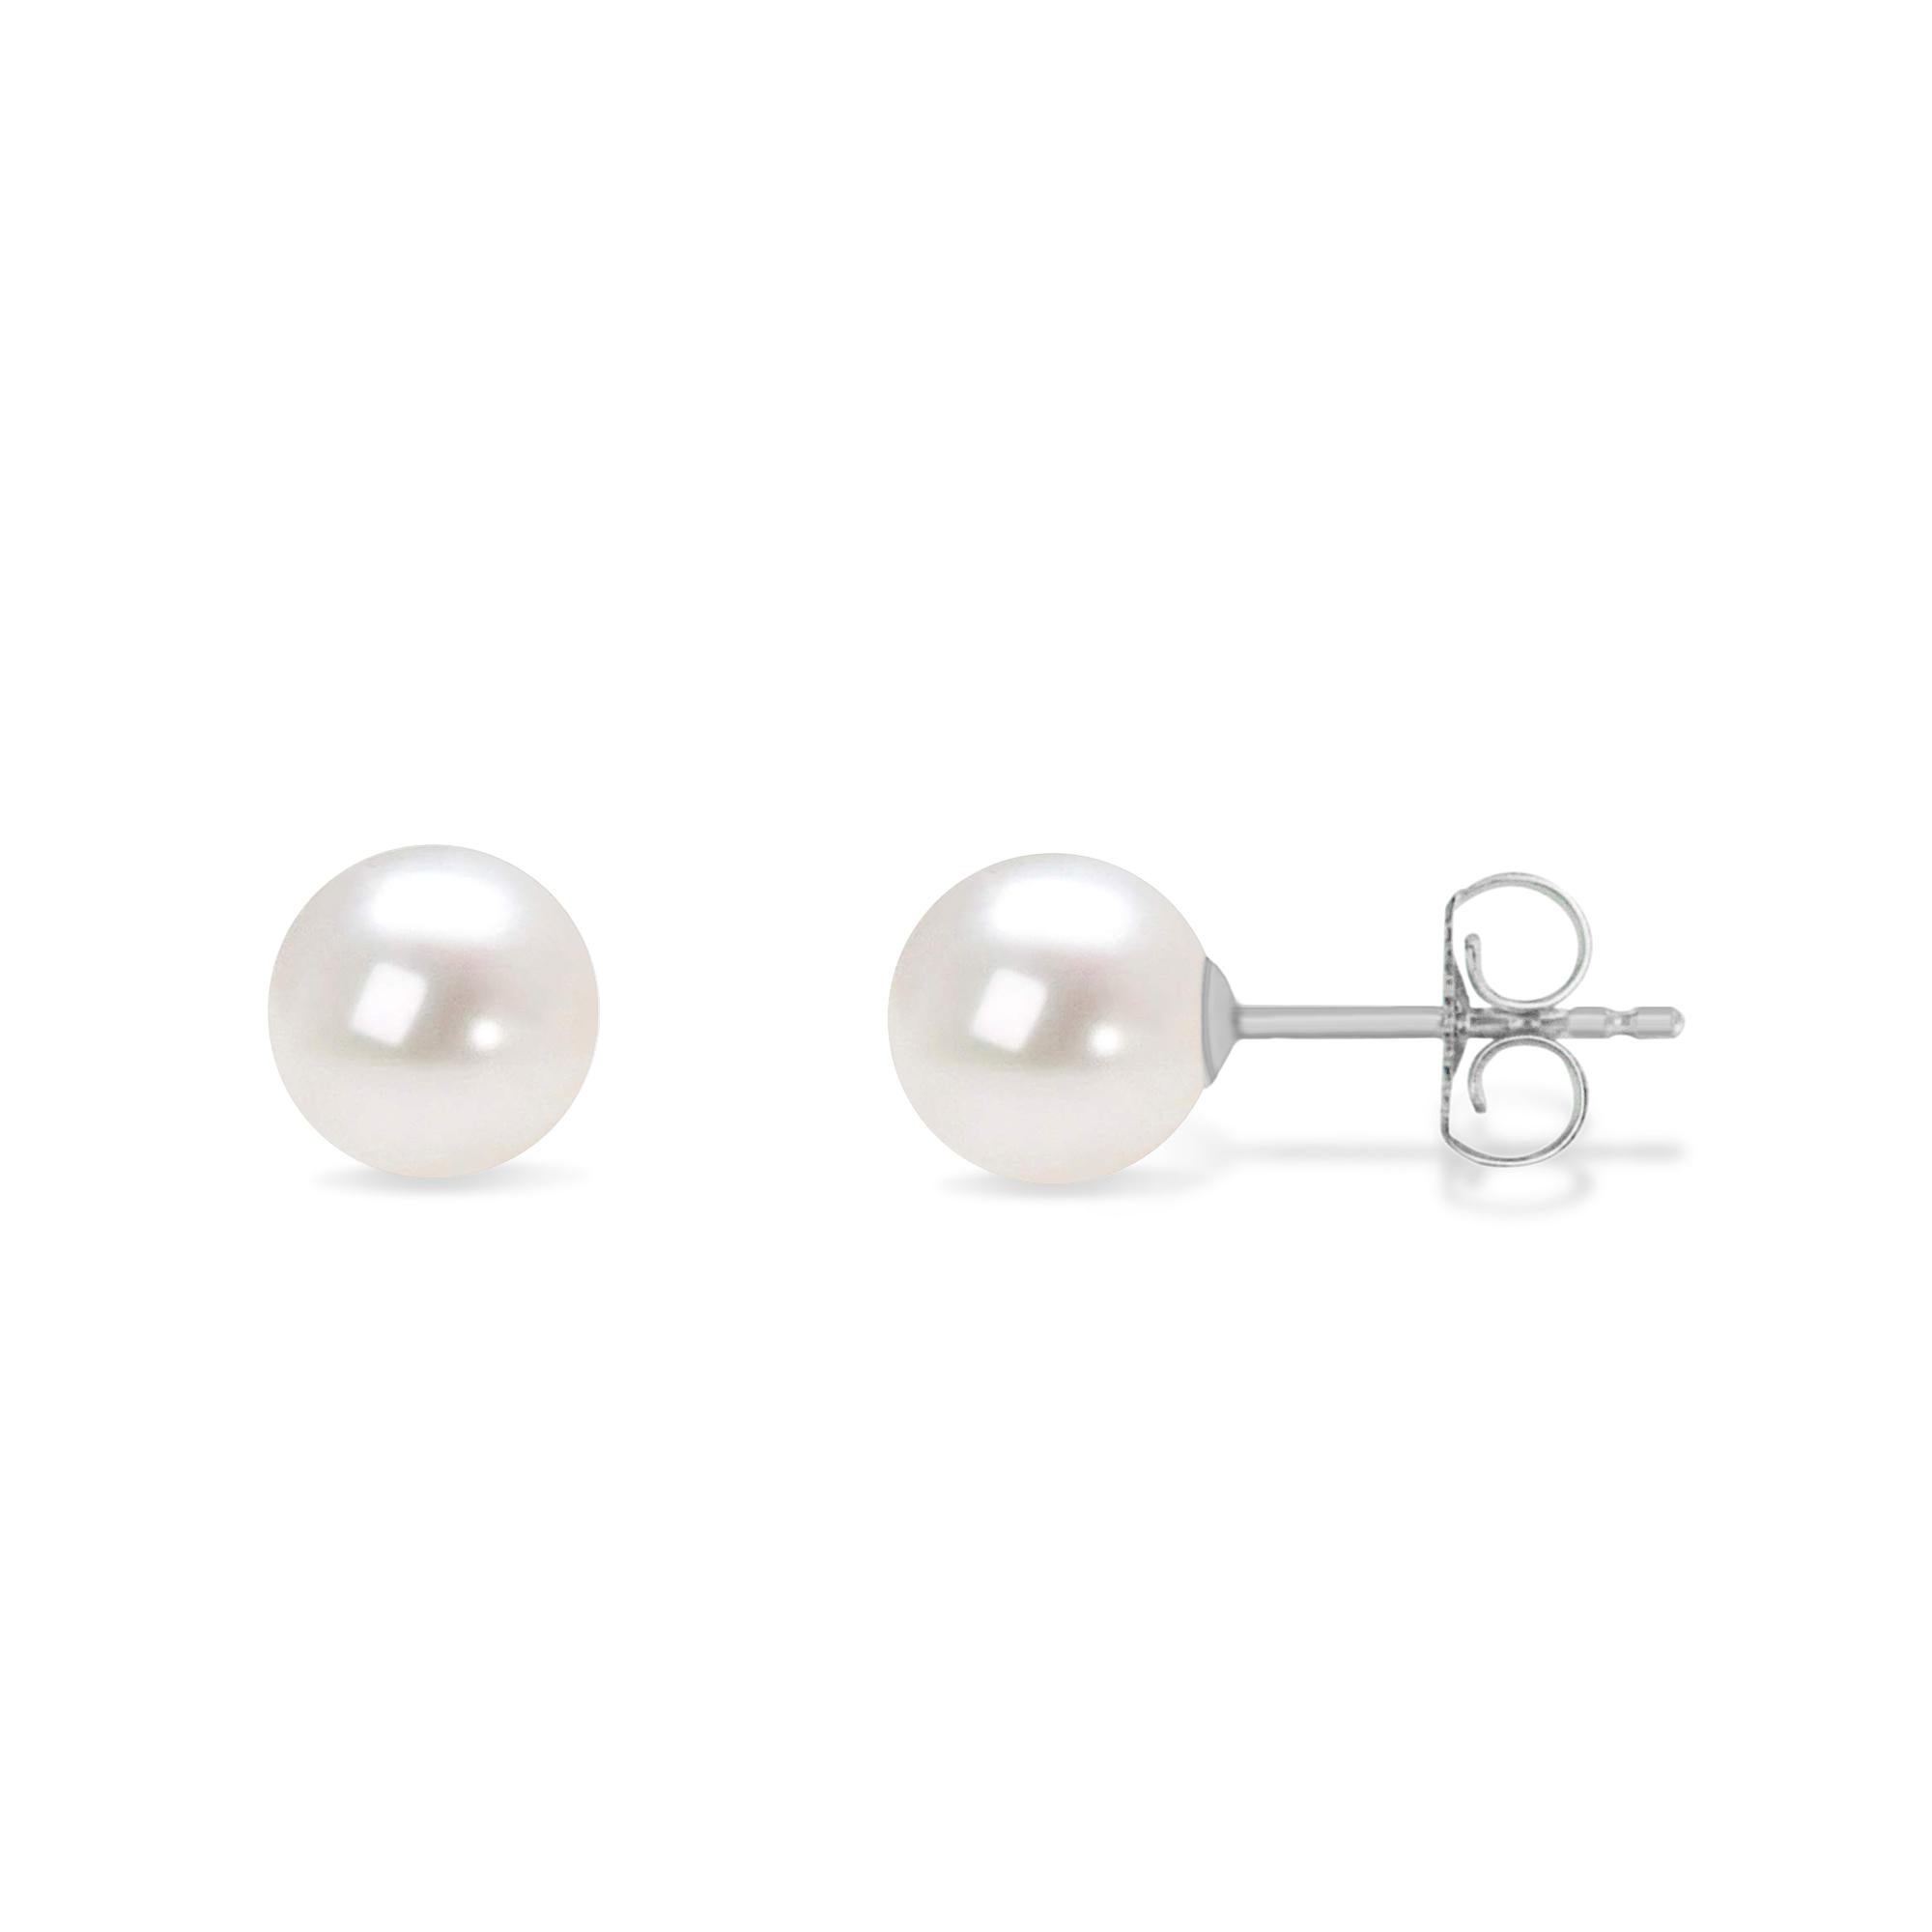 Sweet, sophisticated and seemingly simple, our stunning Akoya Pearls are totally enchanting, with an ever-vibrant luminosity dancing across their radiant surfaces. These 6-6.5MM, cultured white with pink overtone Akoya Pearls are of the highest